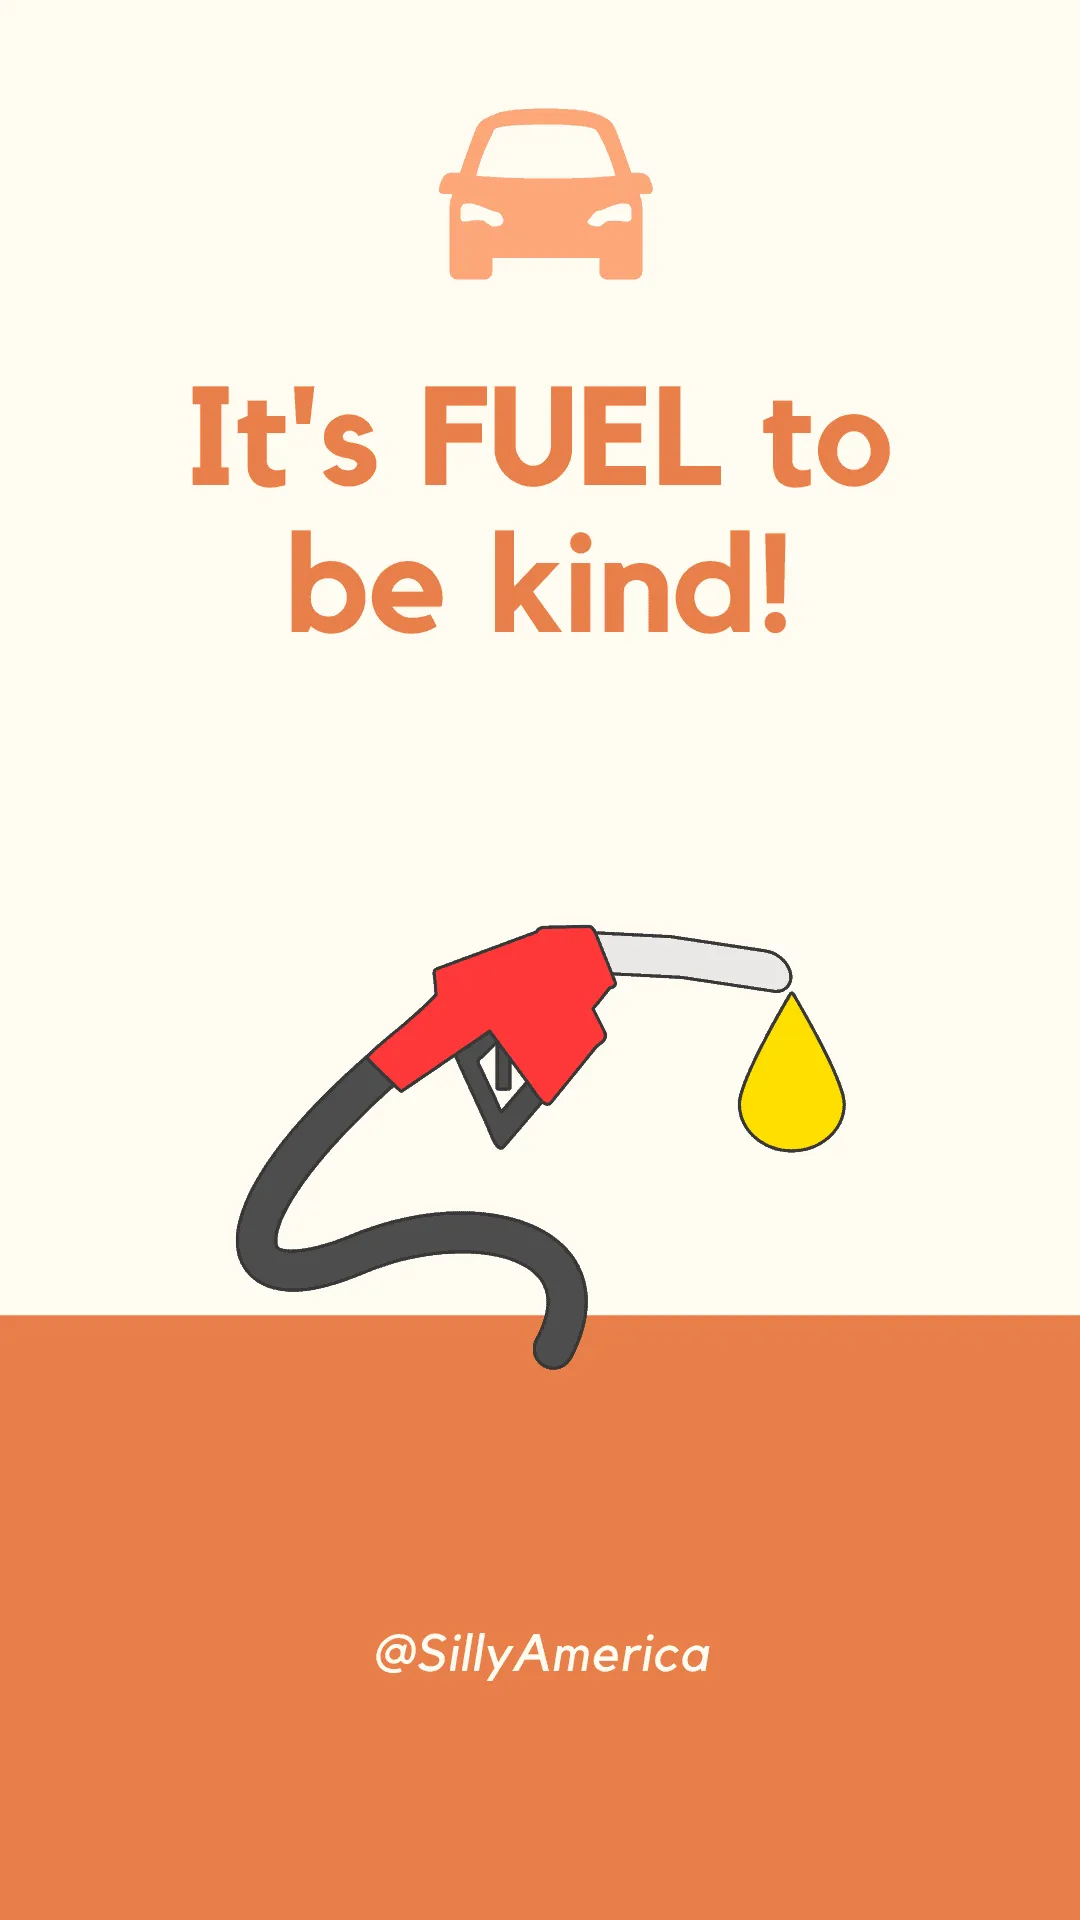 It's FUEL to be kind! - Car Puns to fuel your road trip content!